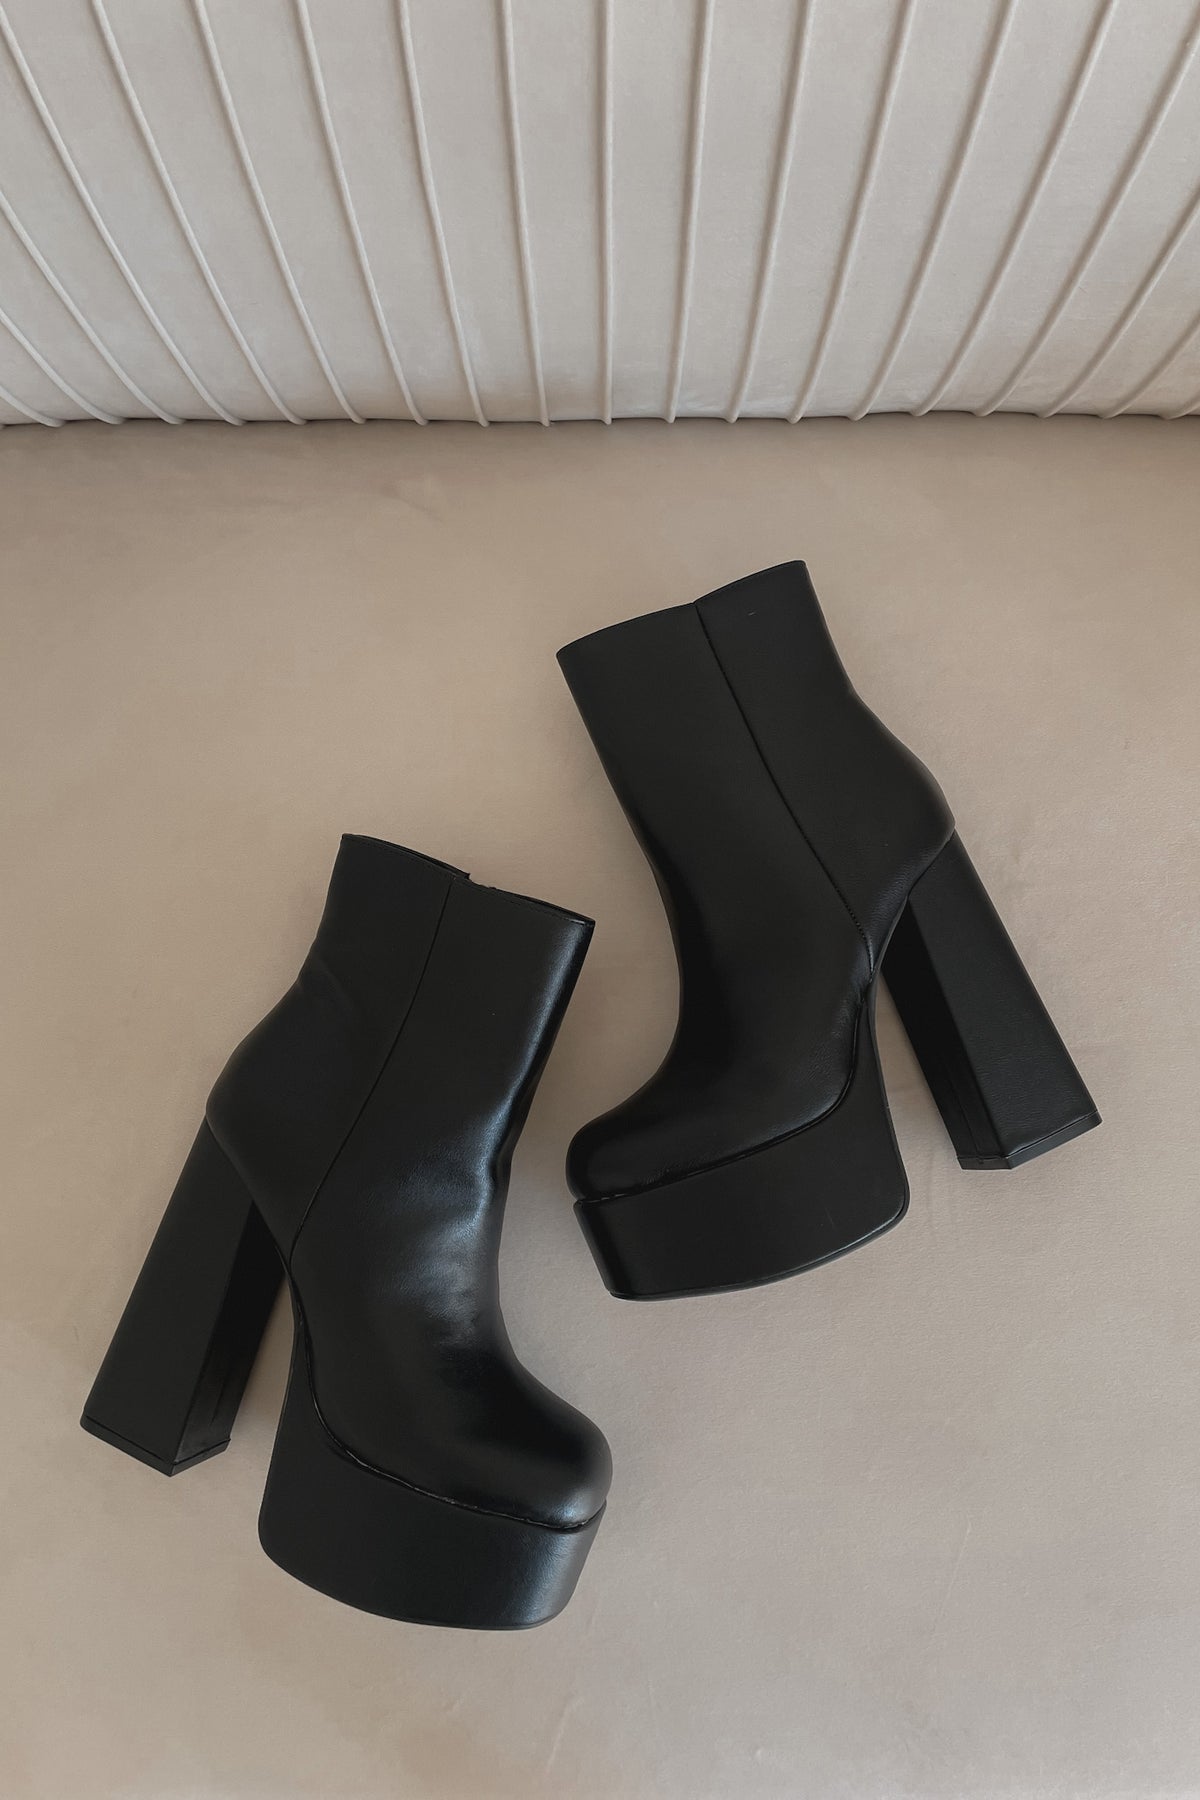 black go go boots - groovy platform booties - halloween outfit shoes - sexy date night shoes - '70s outfit inspo